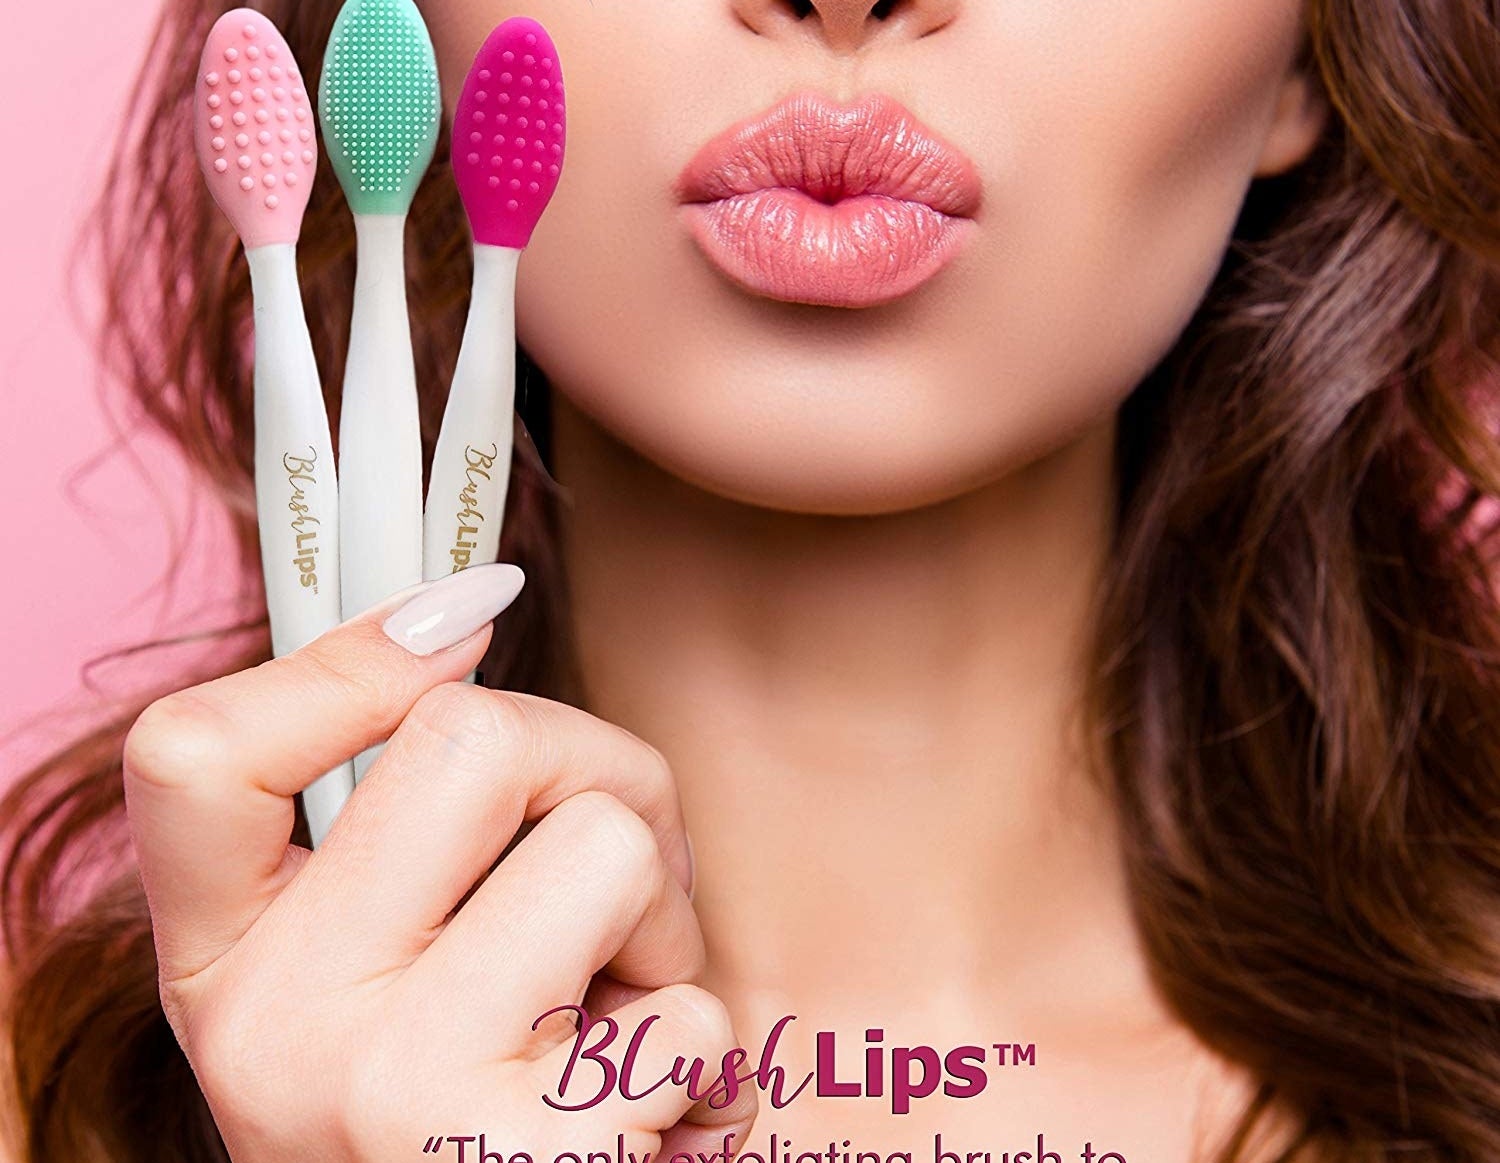 Person puckering lips while holding three toothbrush sized tools with silicone bumps for brushing lips 